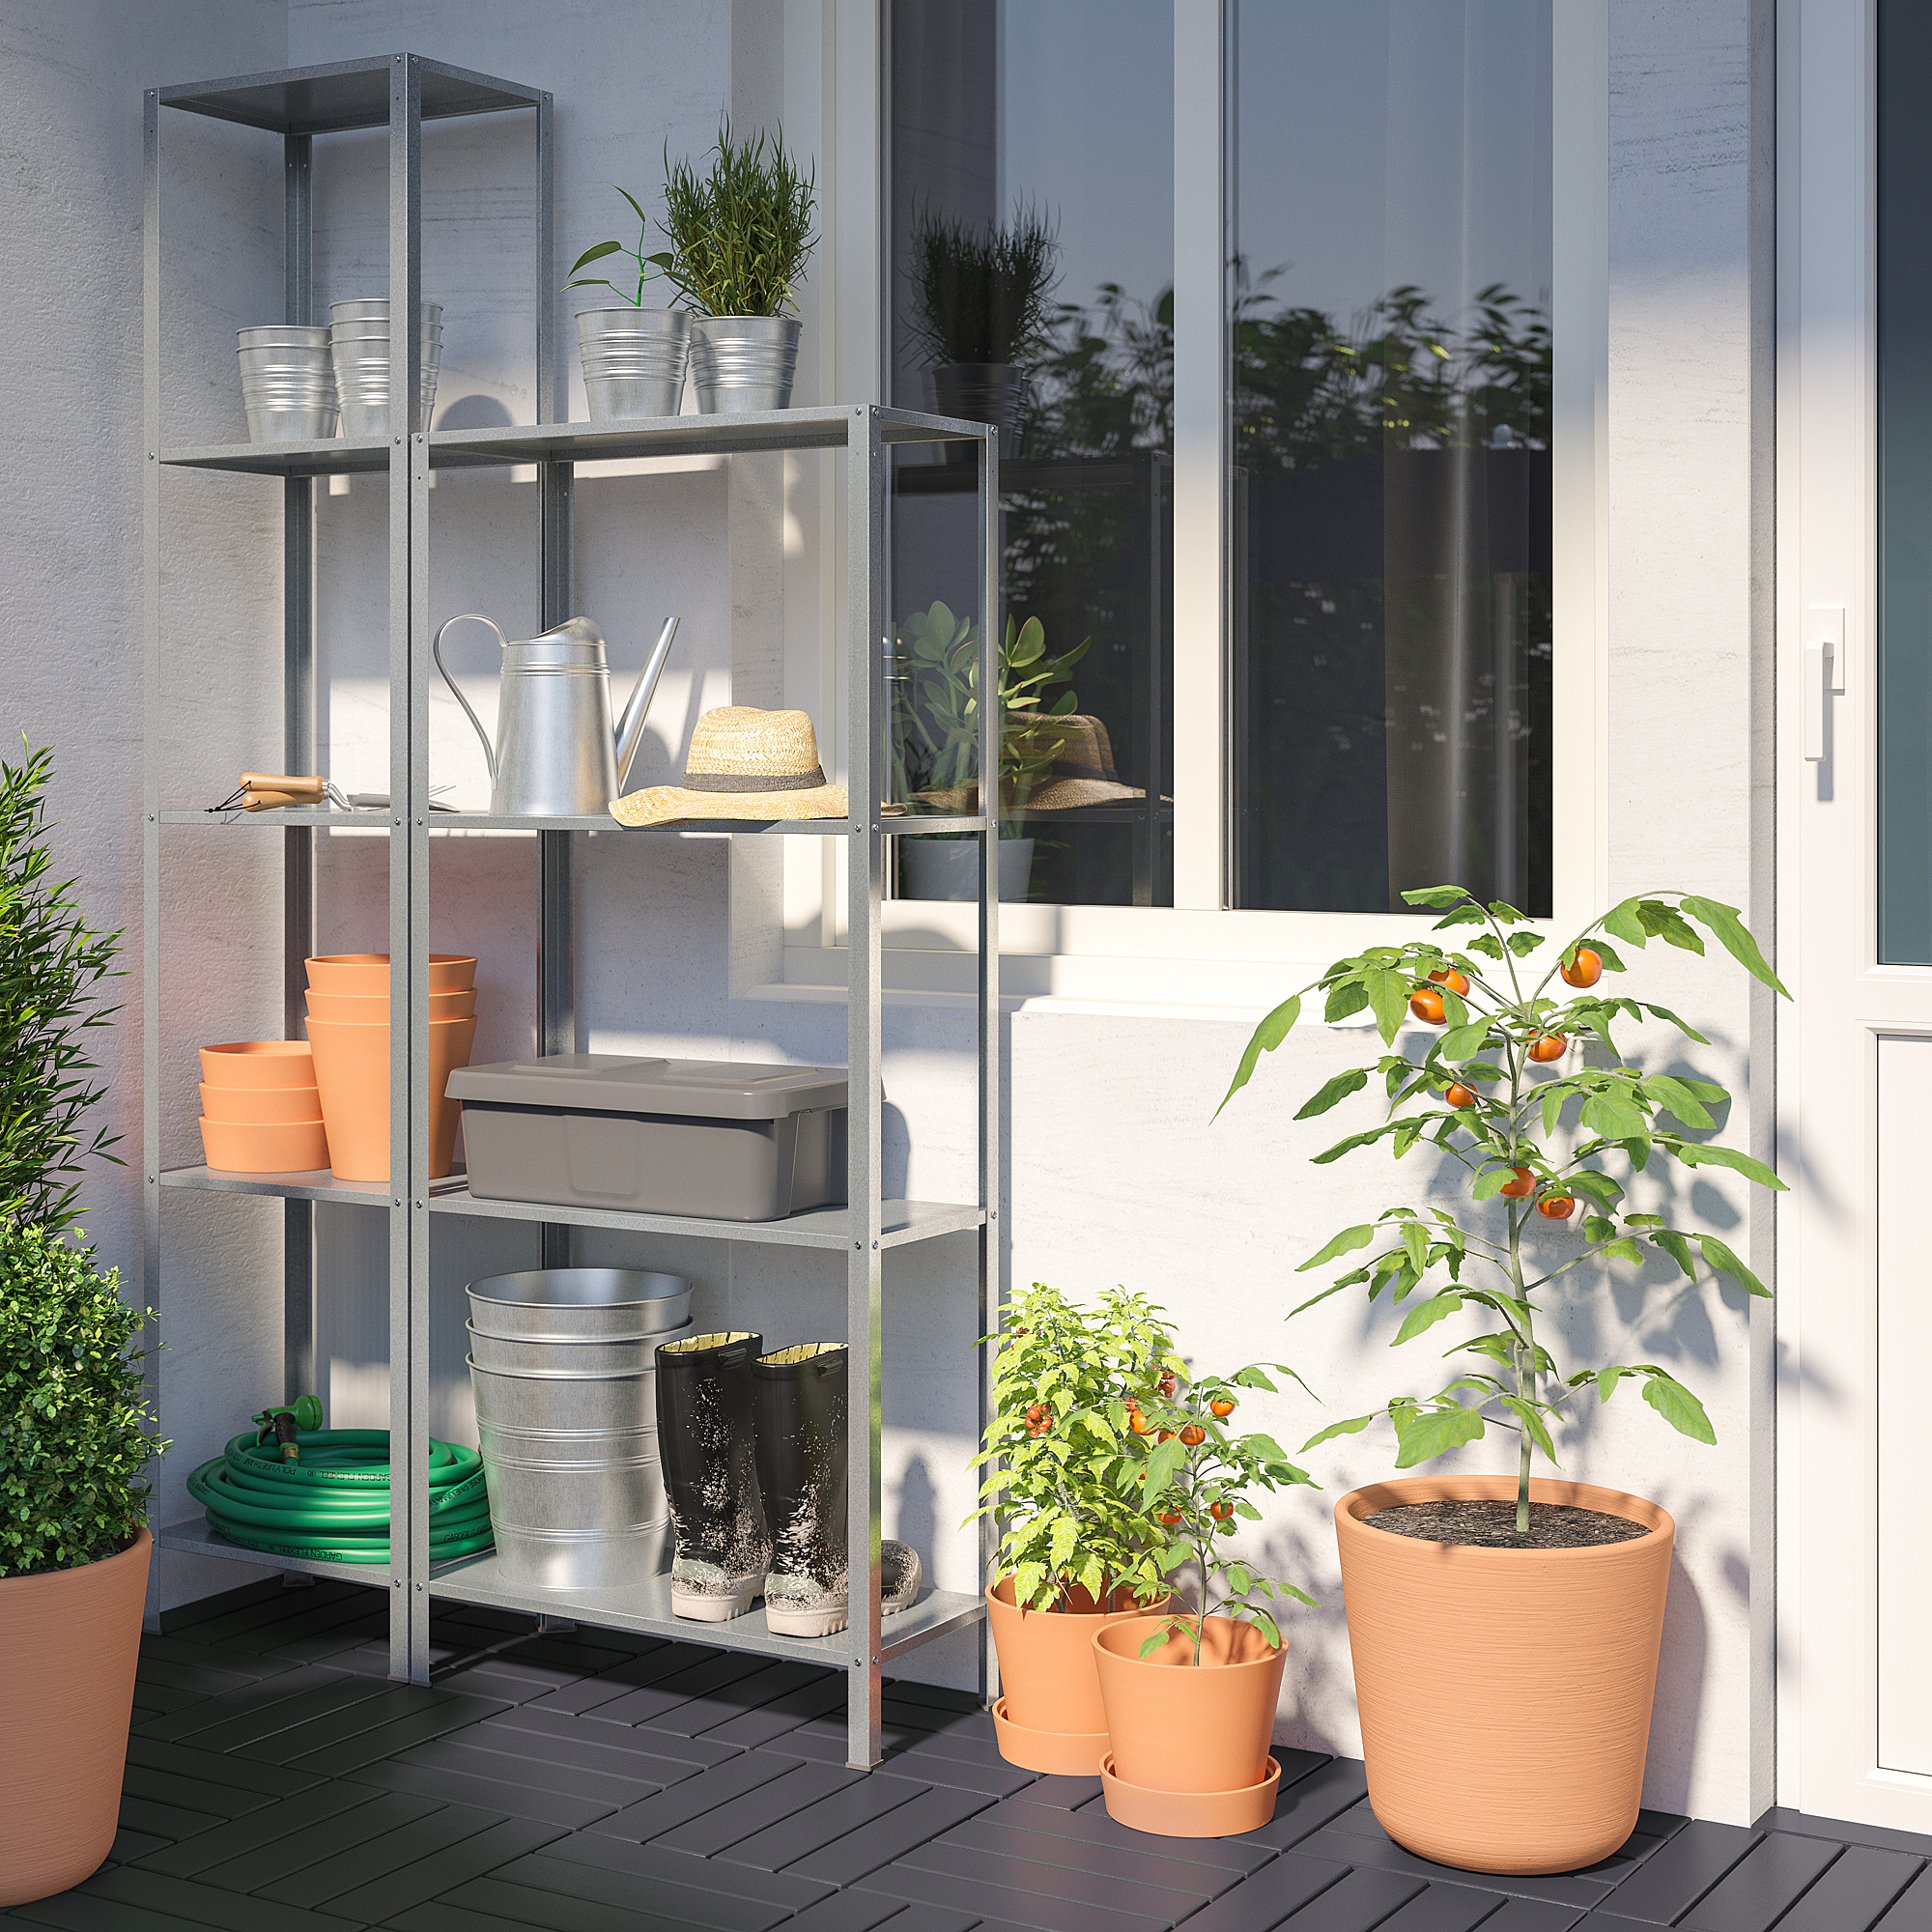 HYLLIS shelving unit in/outdoor